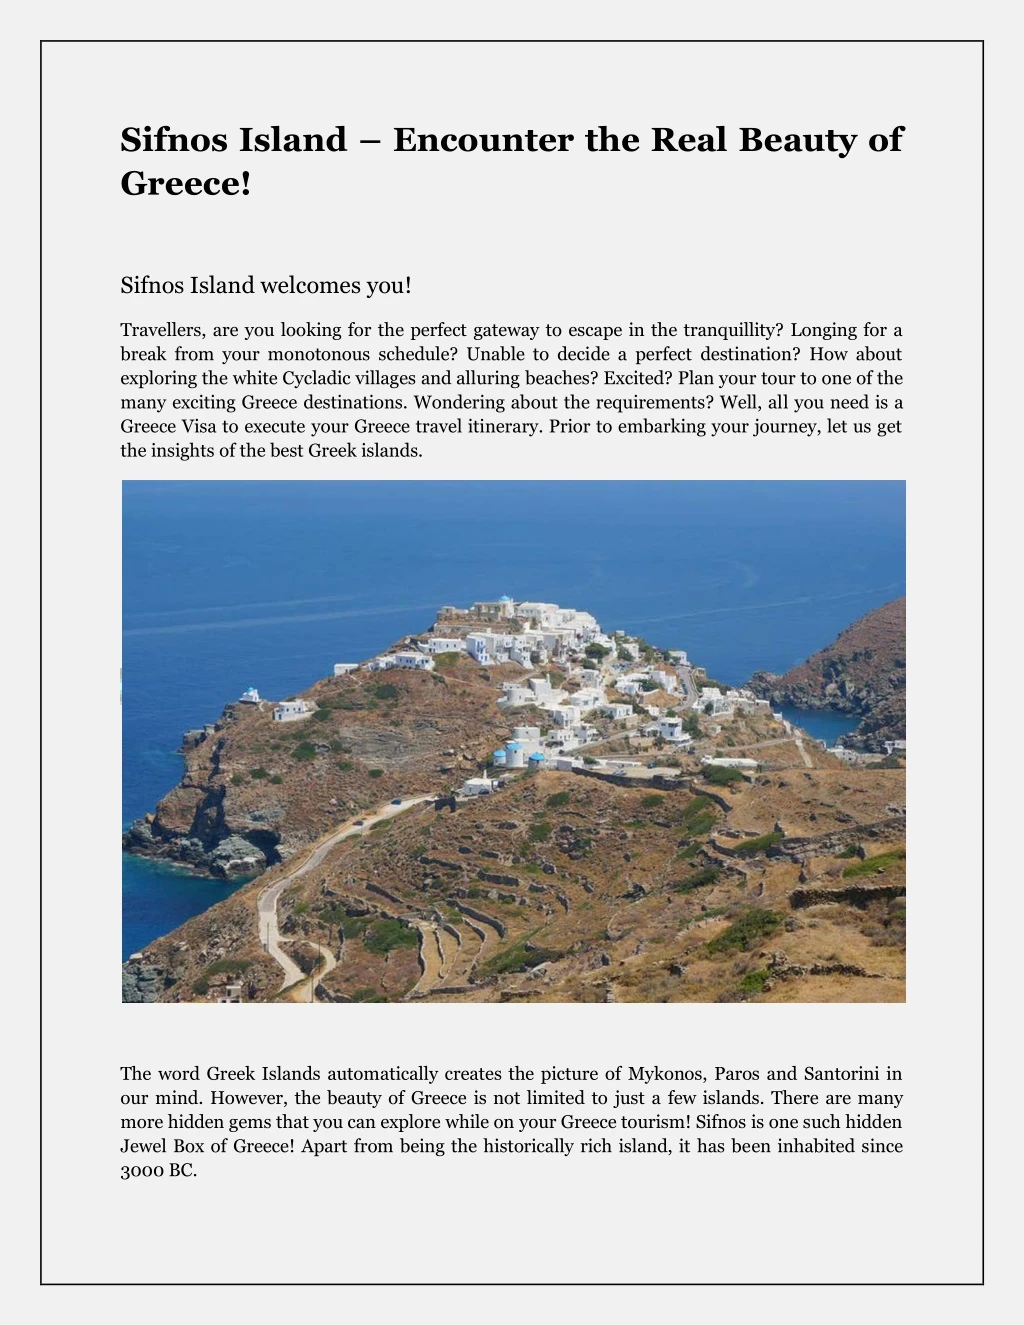 sifnos island encounter the real beauty of greece